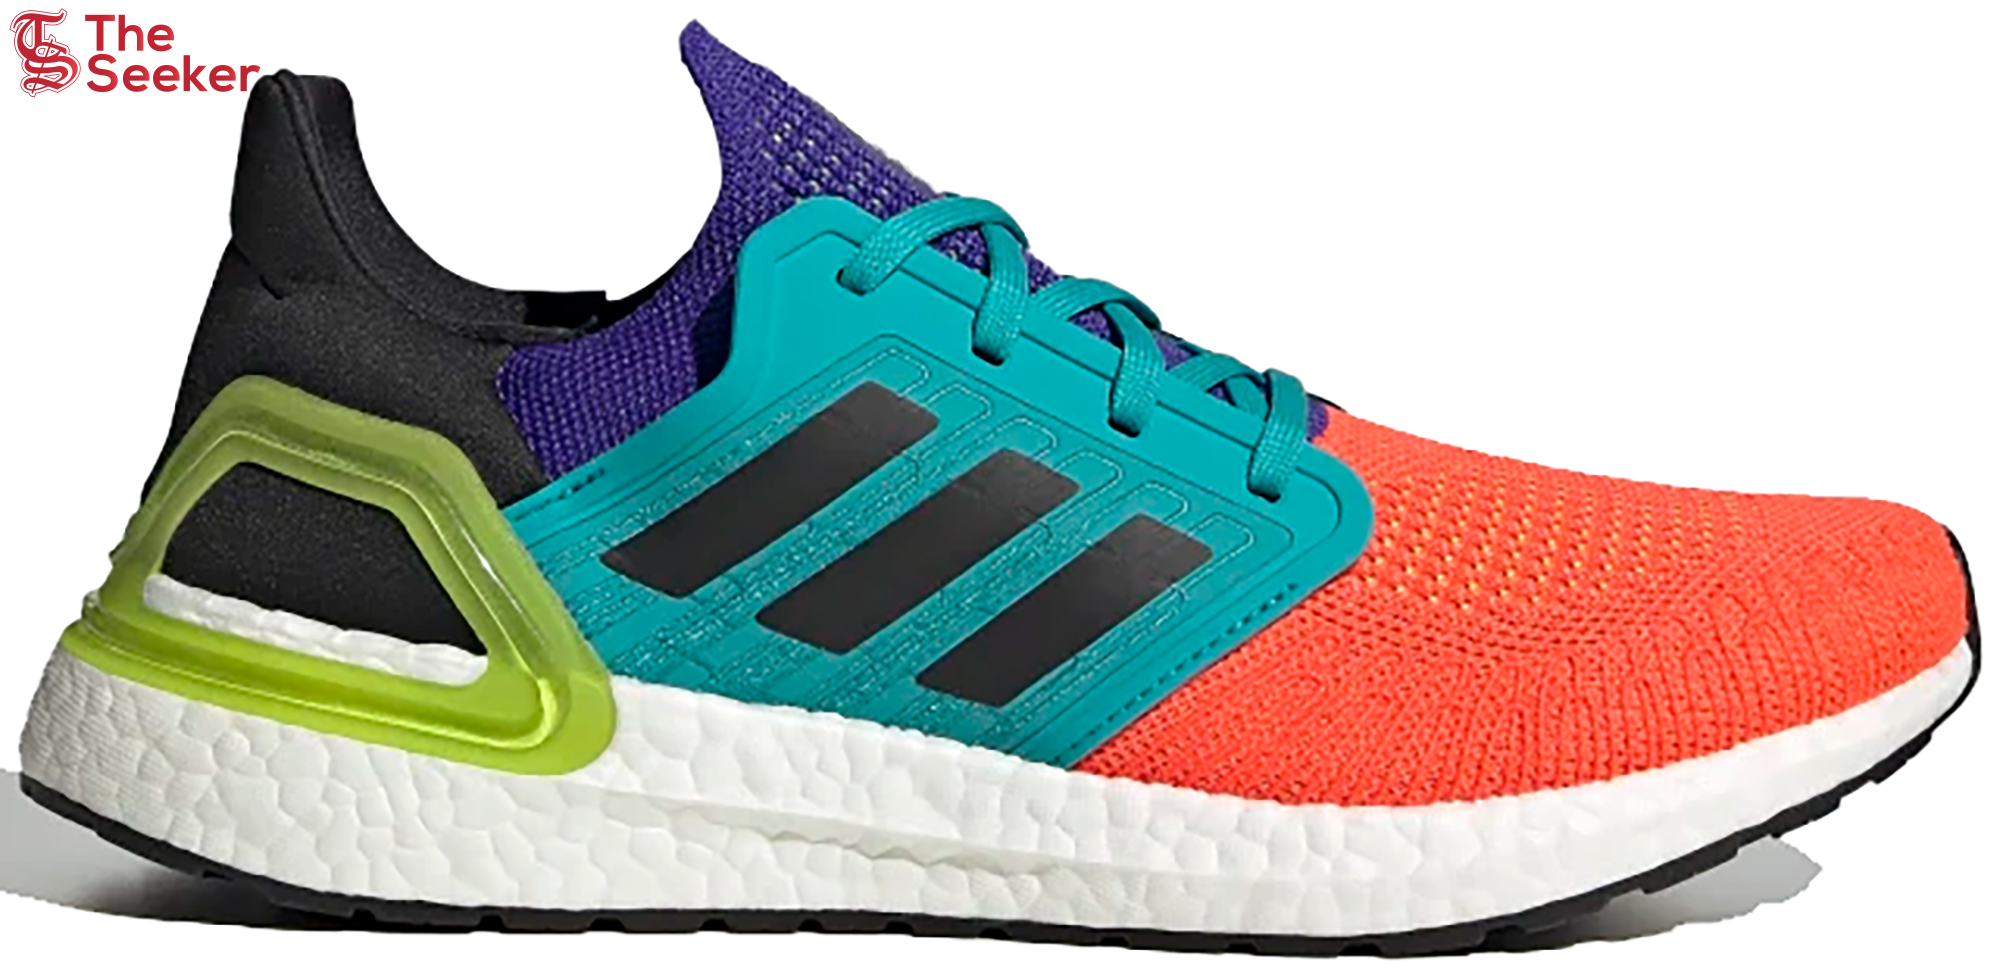 adidas Ultra Boost 20 What The Solar Red